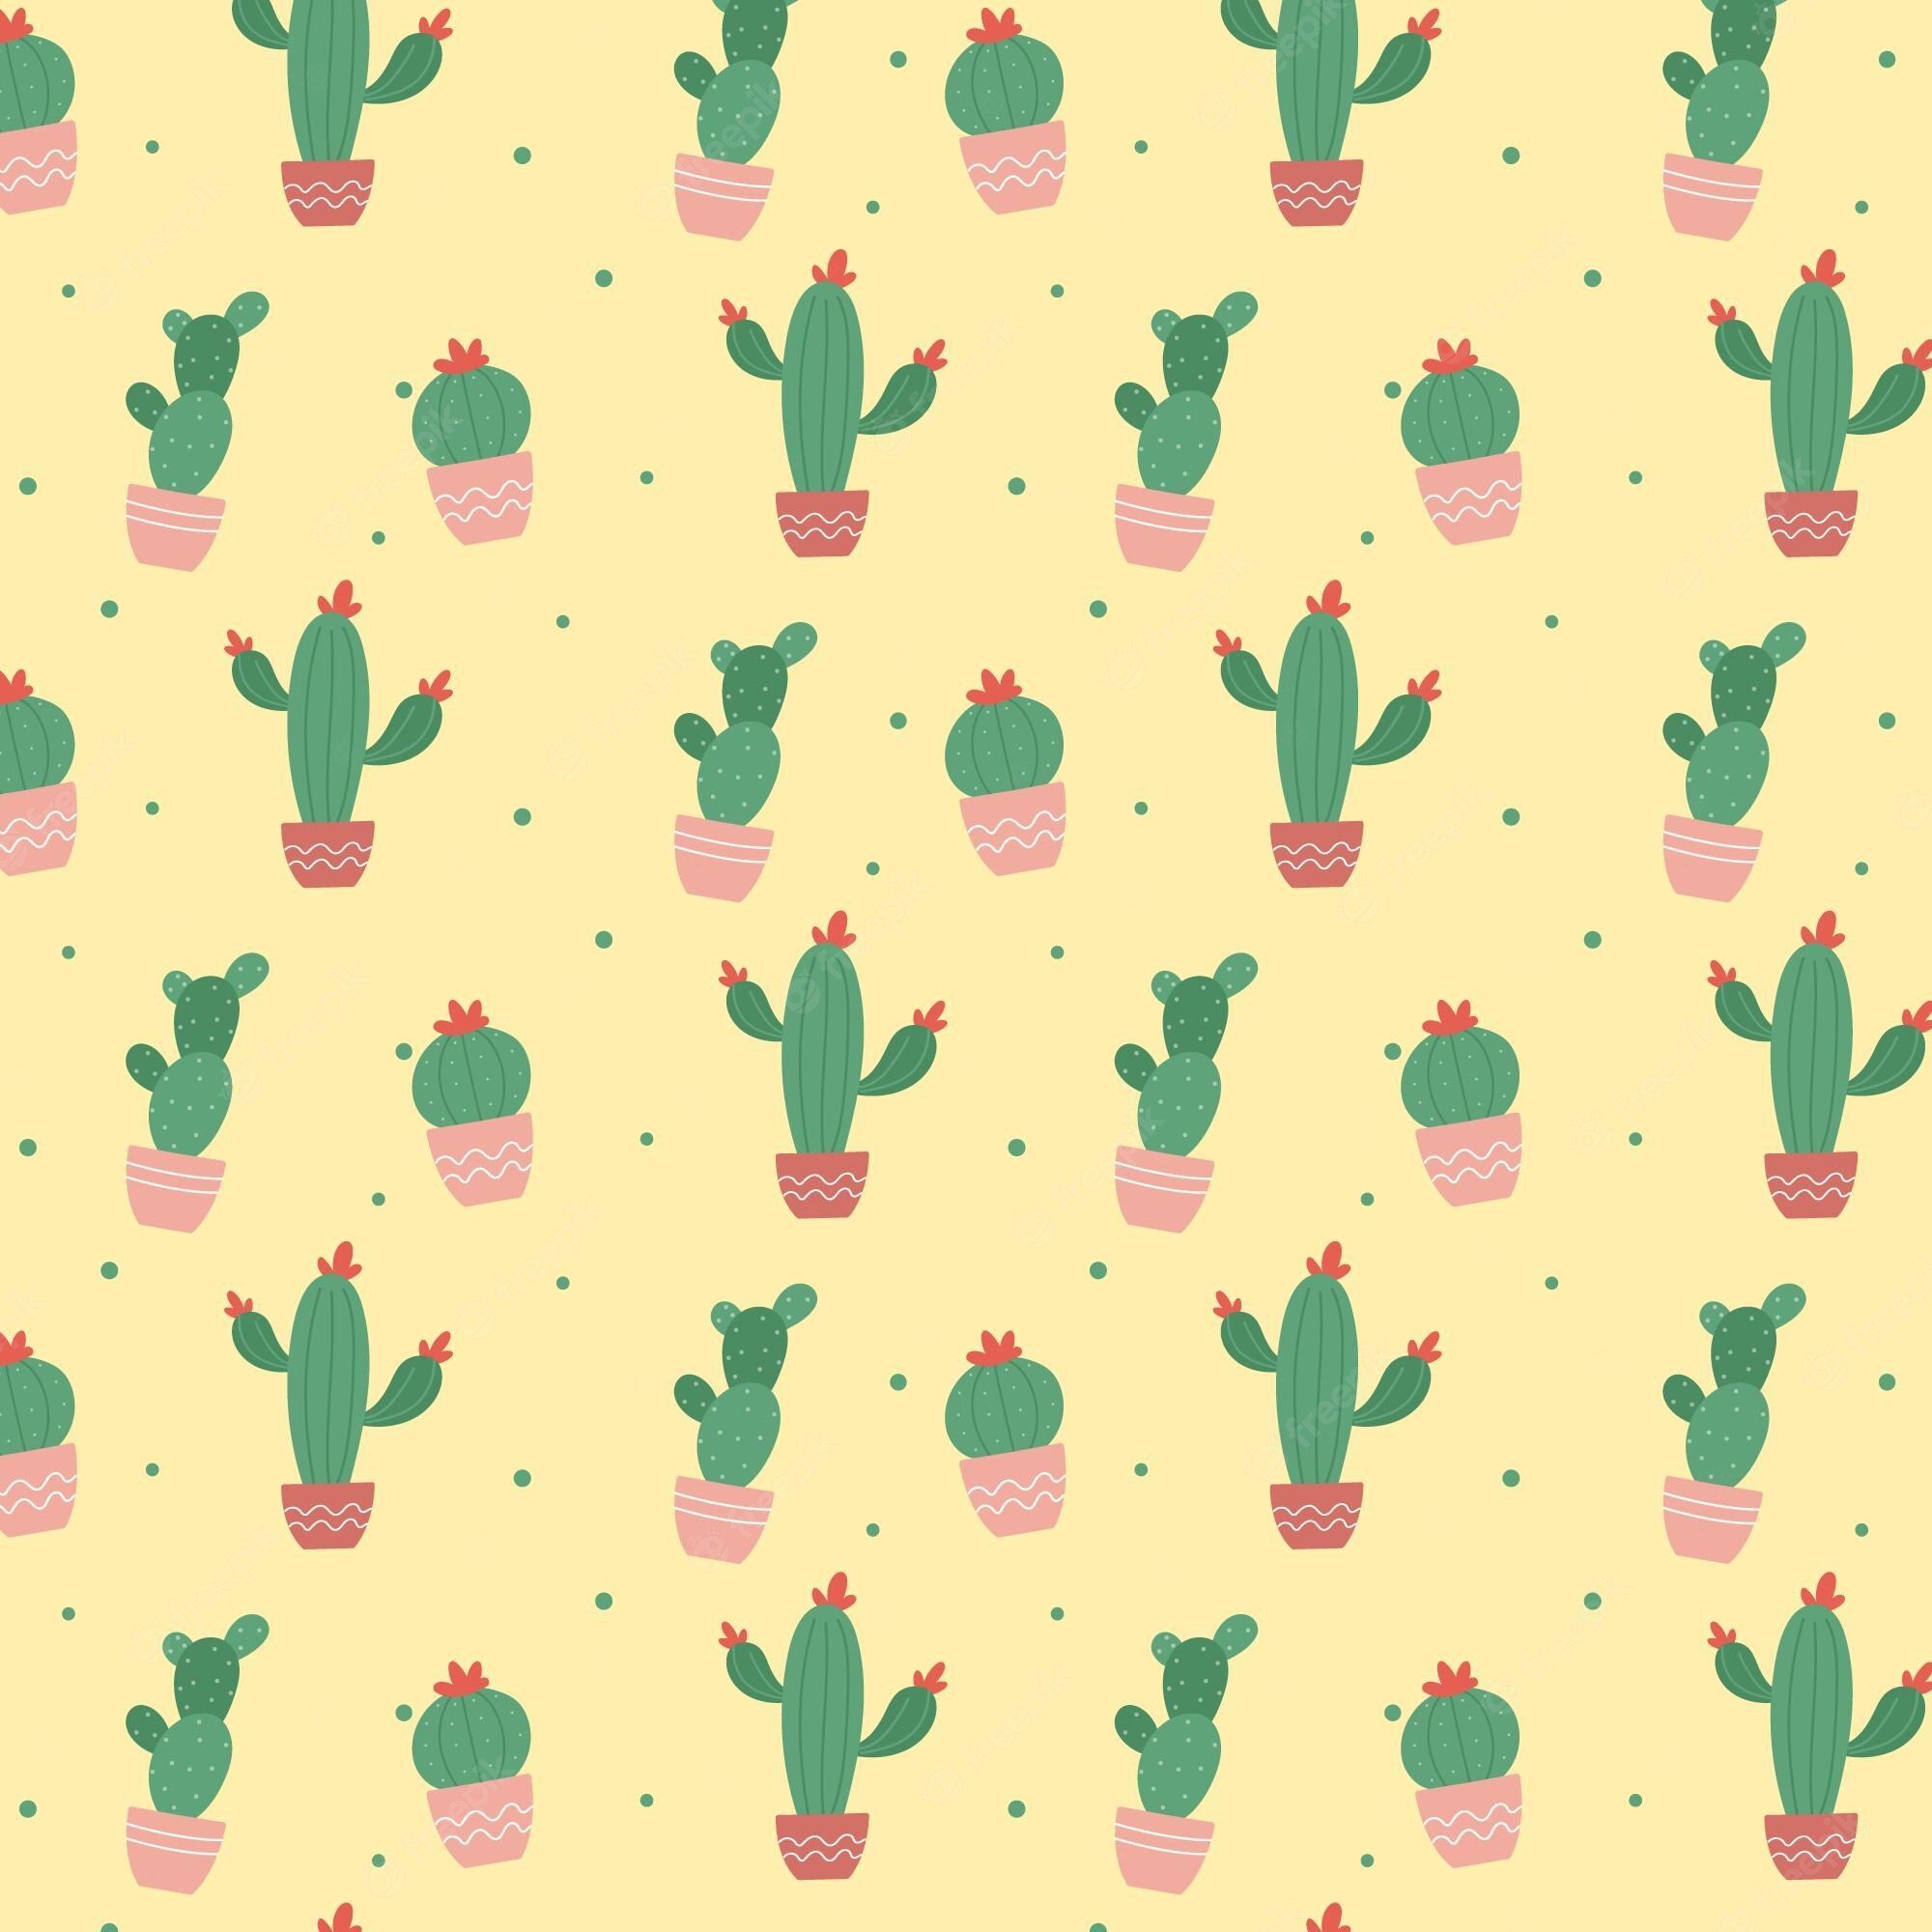 A pattern of cactus plants on yellow background - Cactus